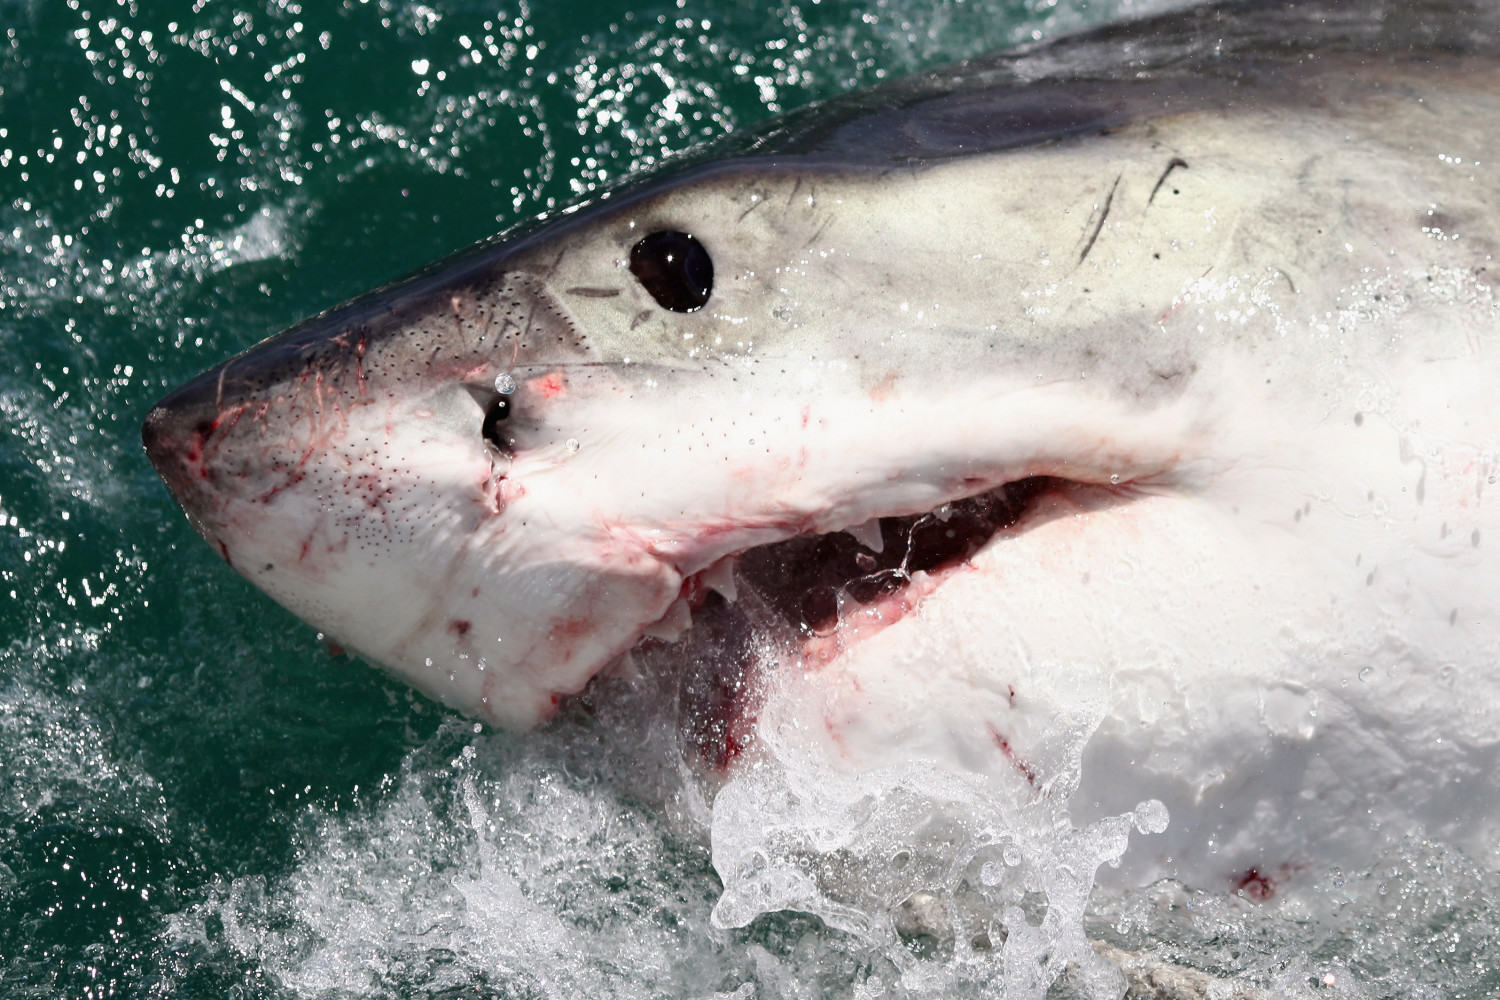 Commercial Fishing Expedition Finds 4,500 Pound Shark With Turtle in Its Mouth